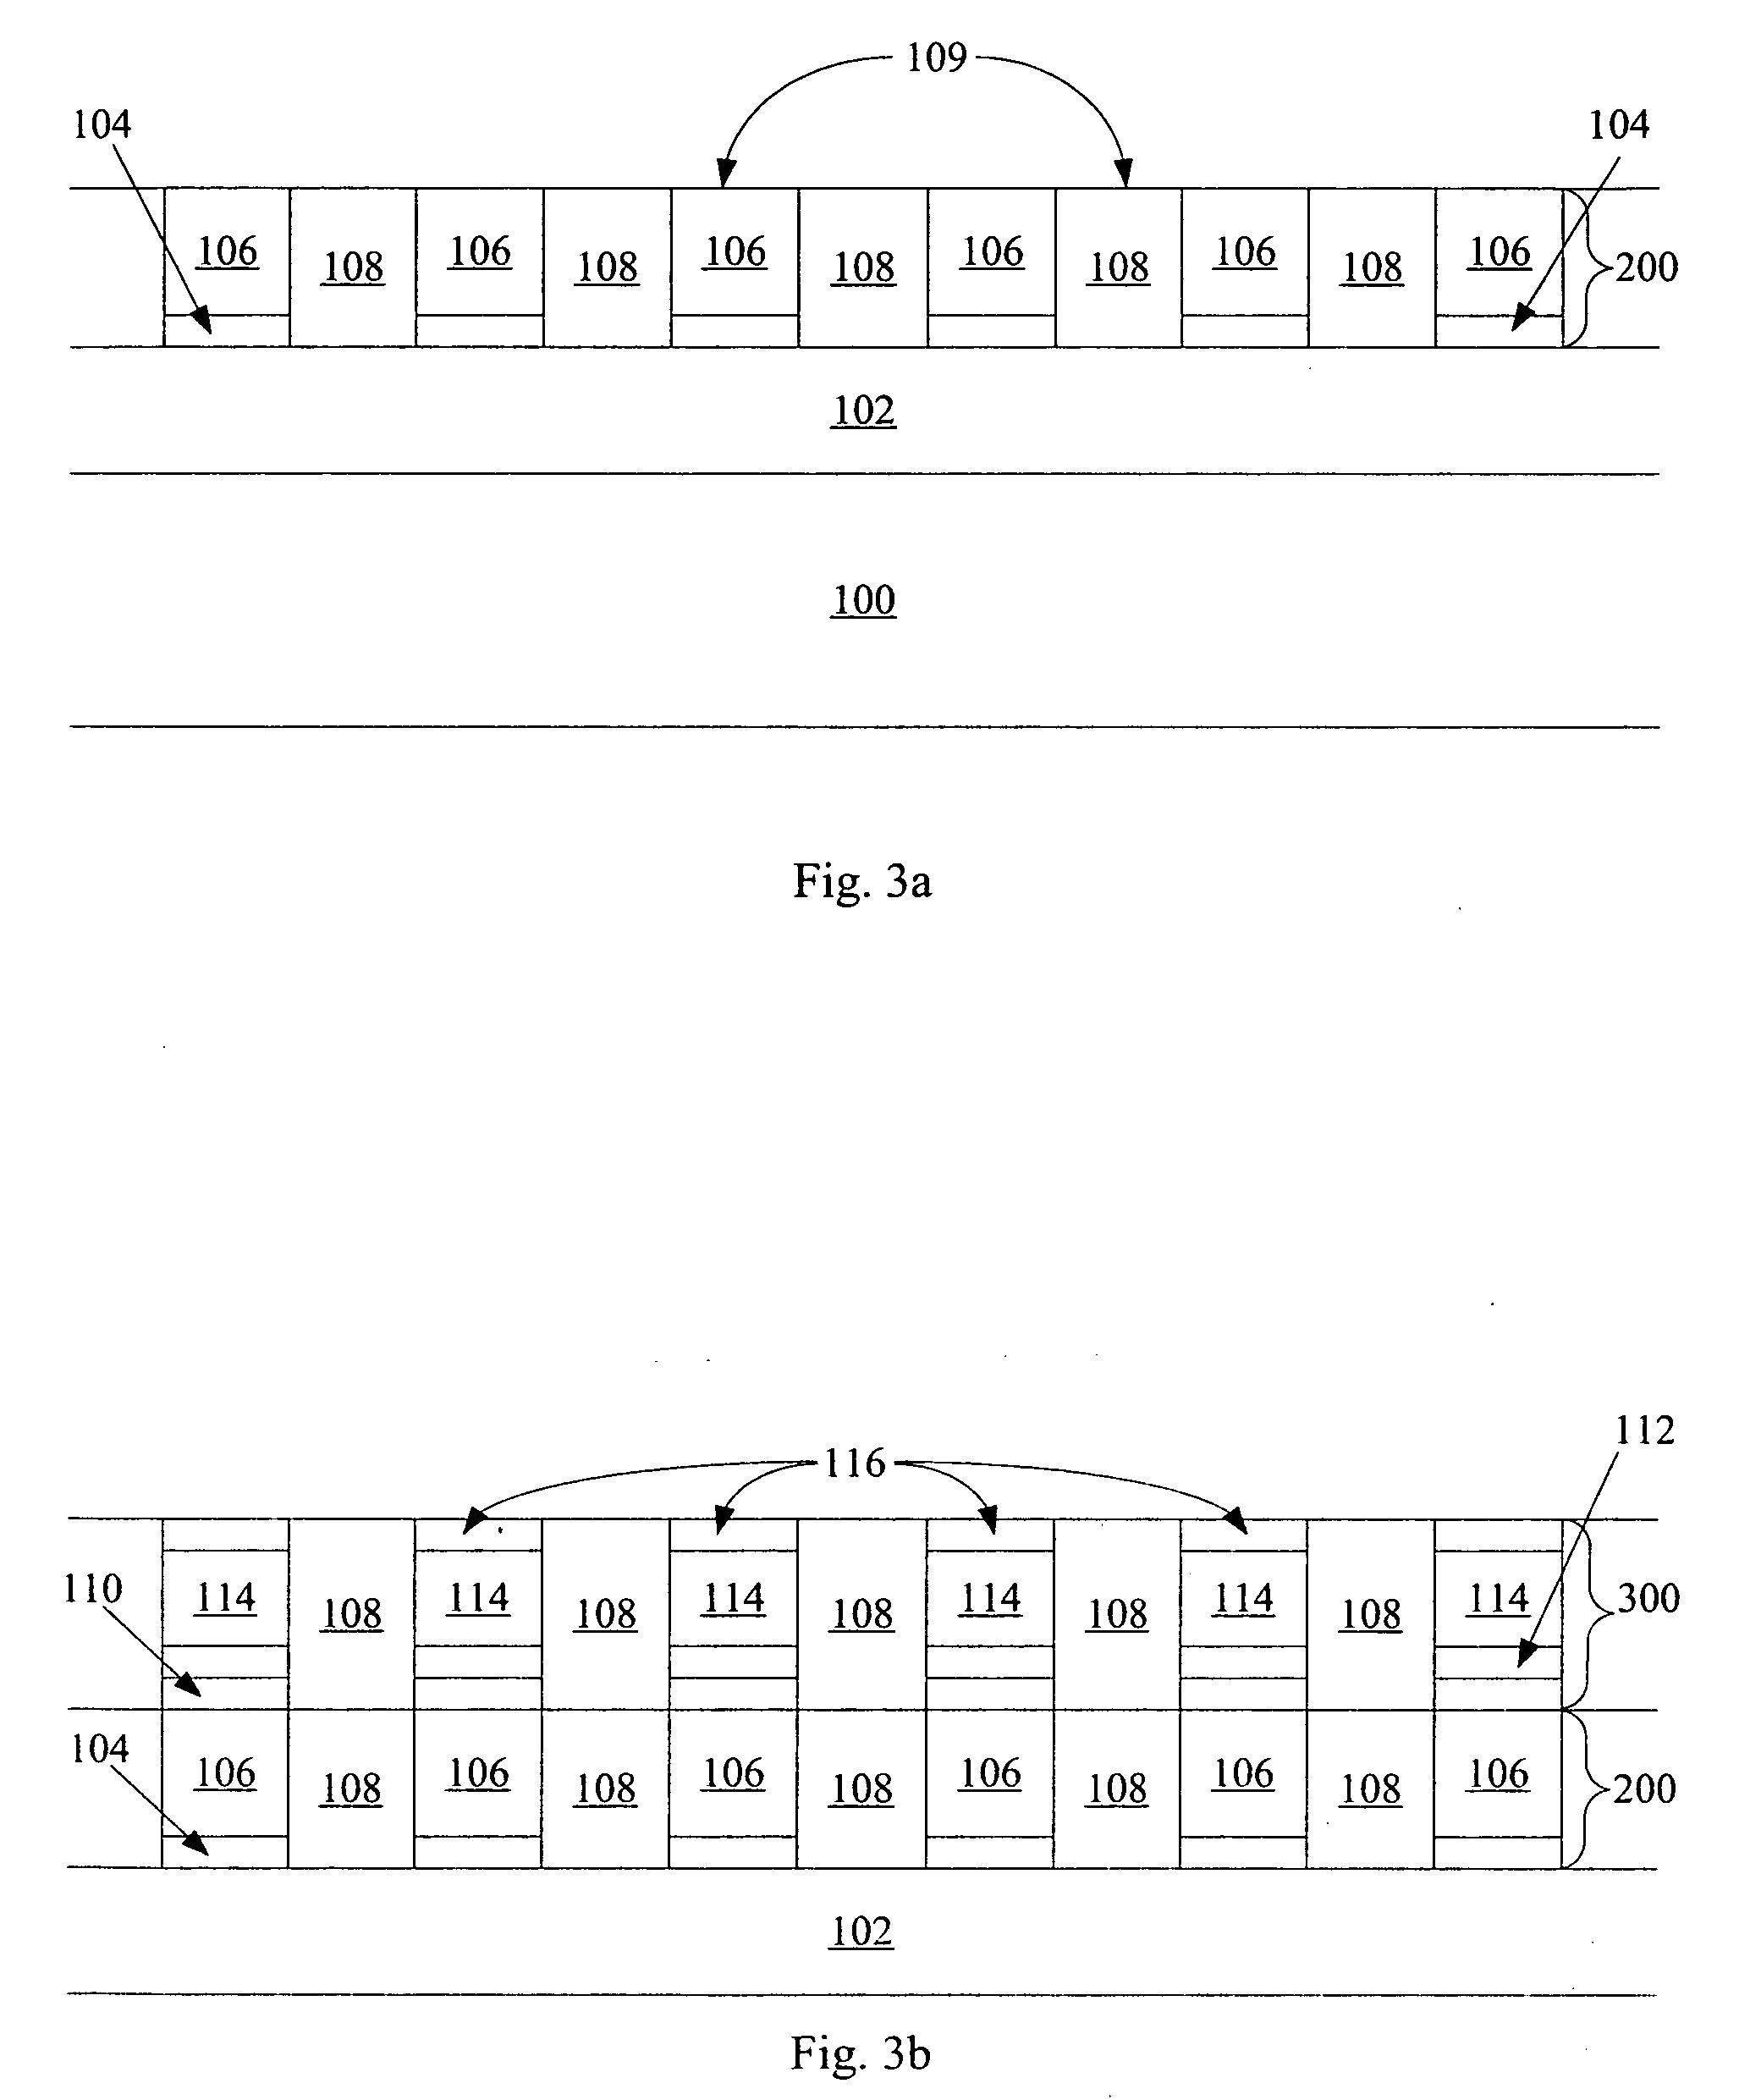 Non-volatile memory cell comprising a dielectric layer and a phase change material in series